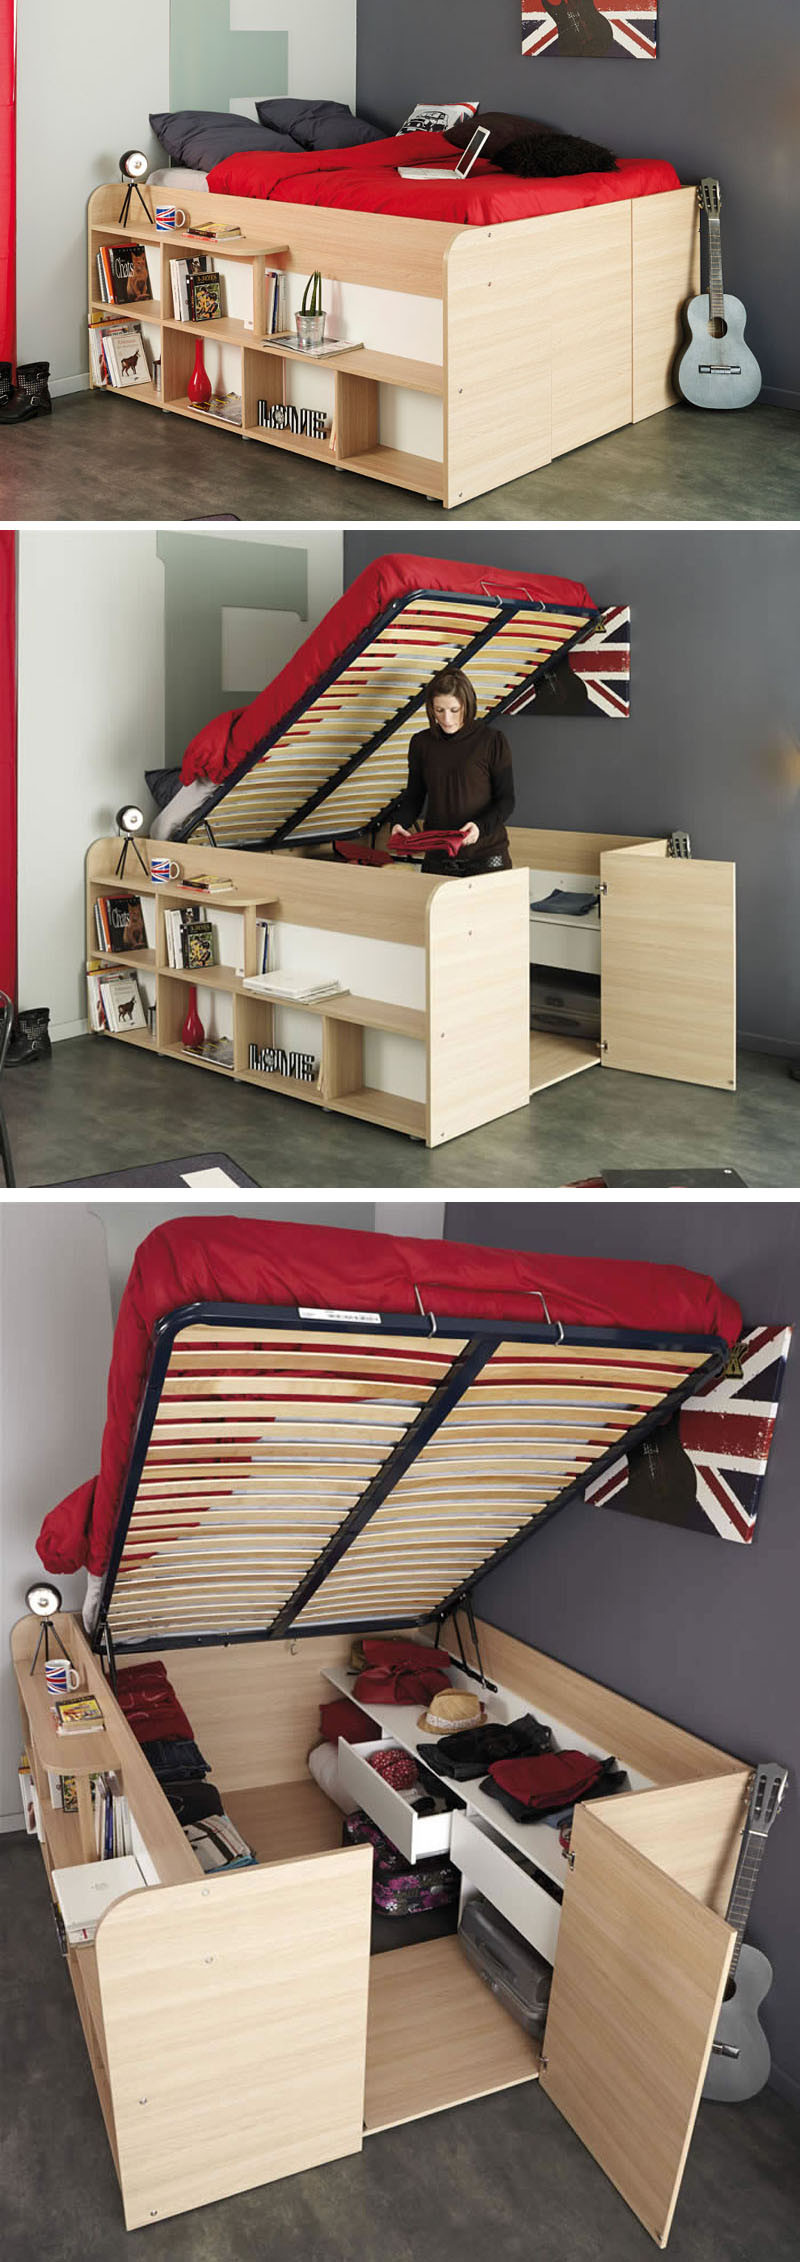 Small Space Storage Solution - This Bed Has Plenty Of Storage Space Built Into The Design